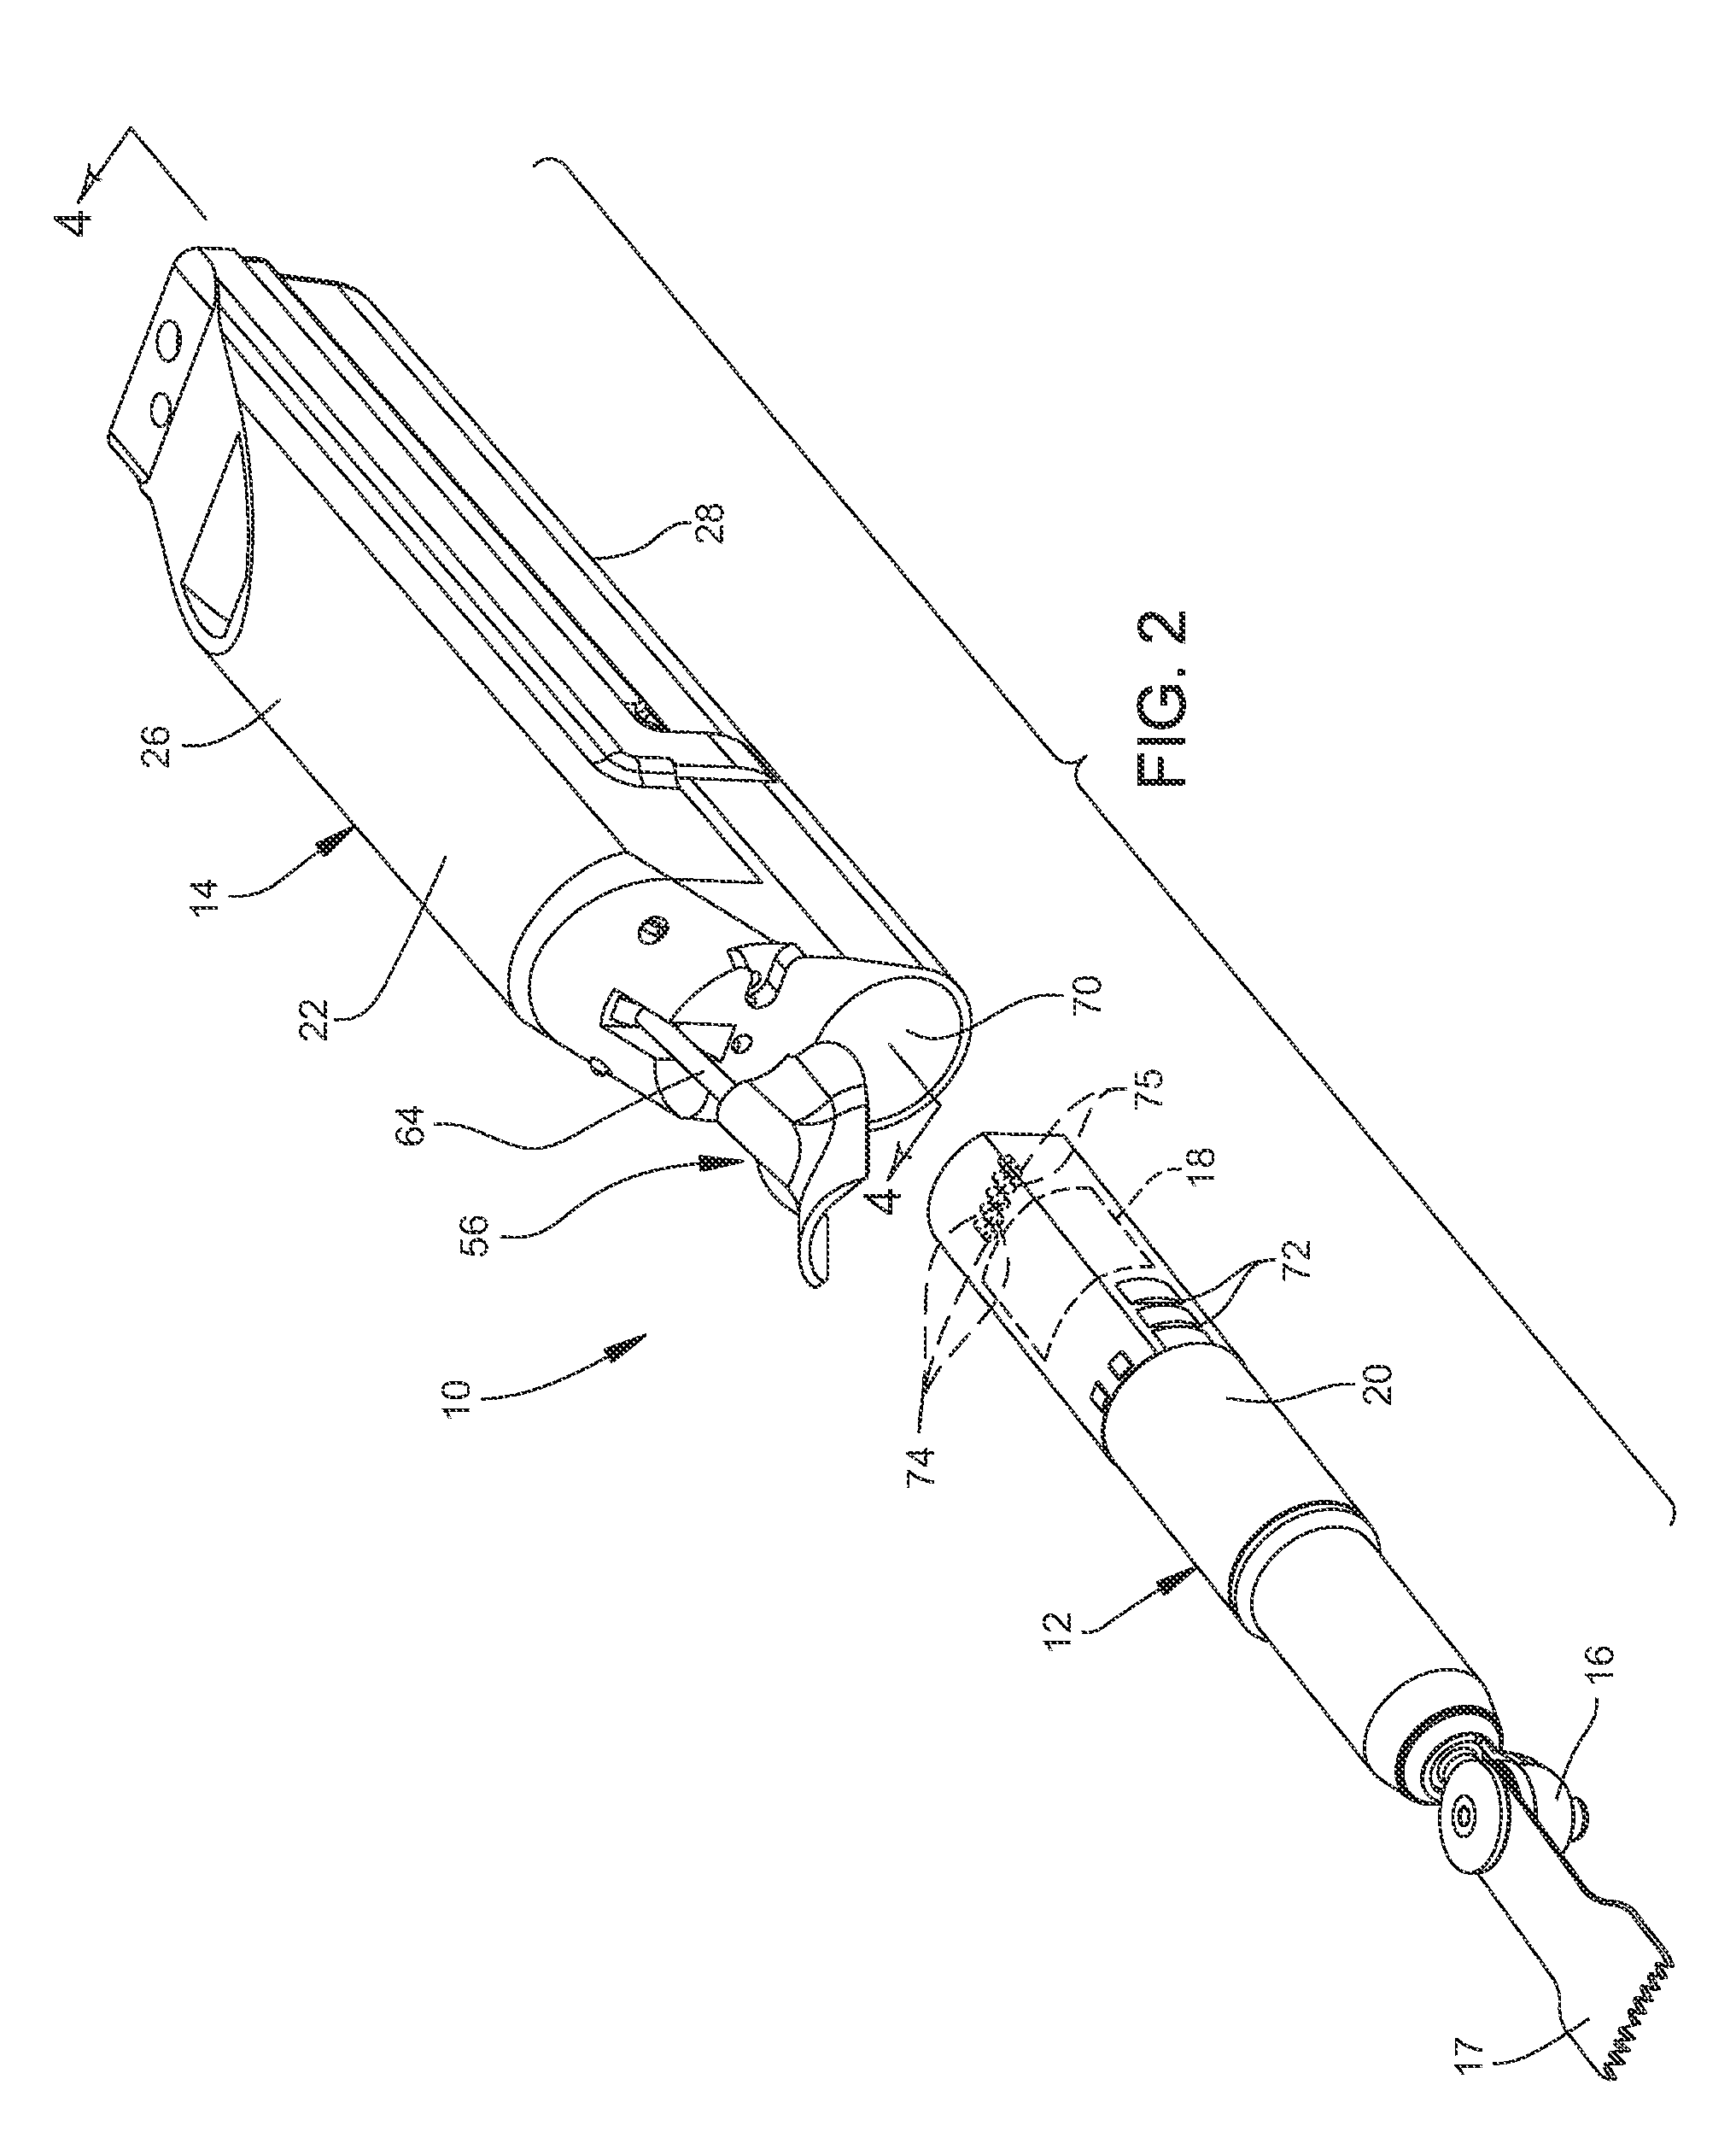 Battery and control module for both energizing and controlling a powered surgical tool that is releasably attached to the module